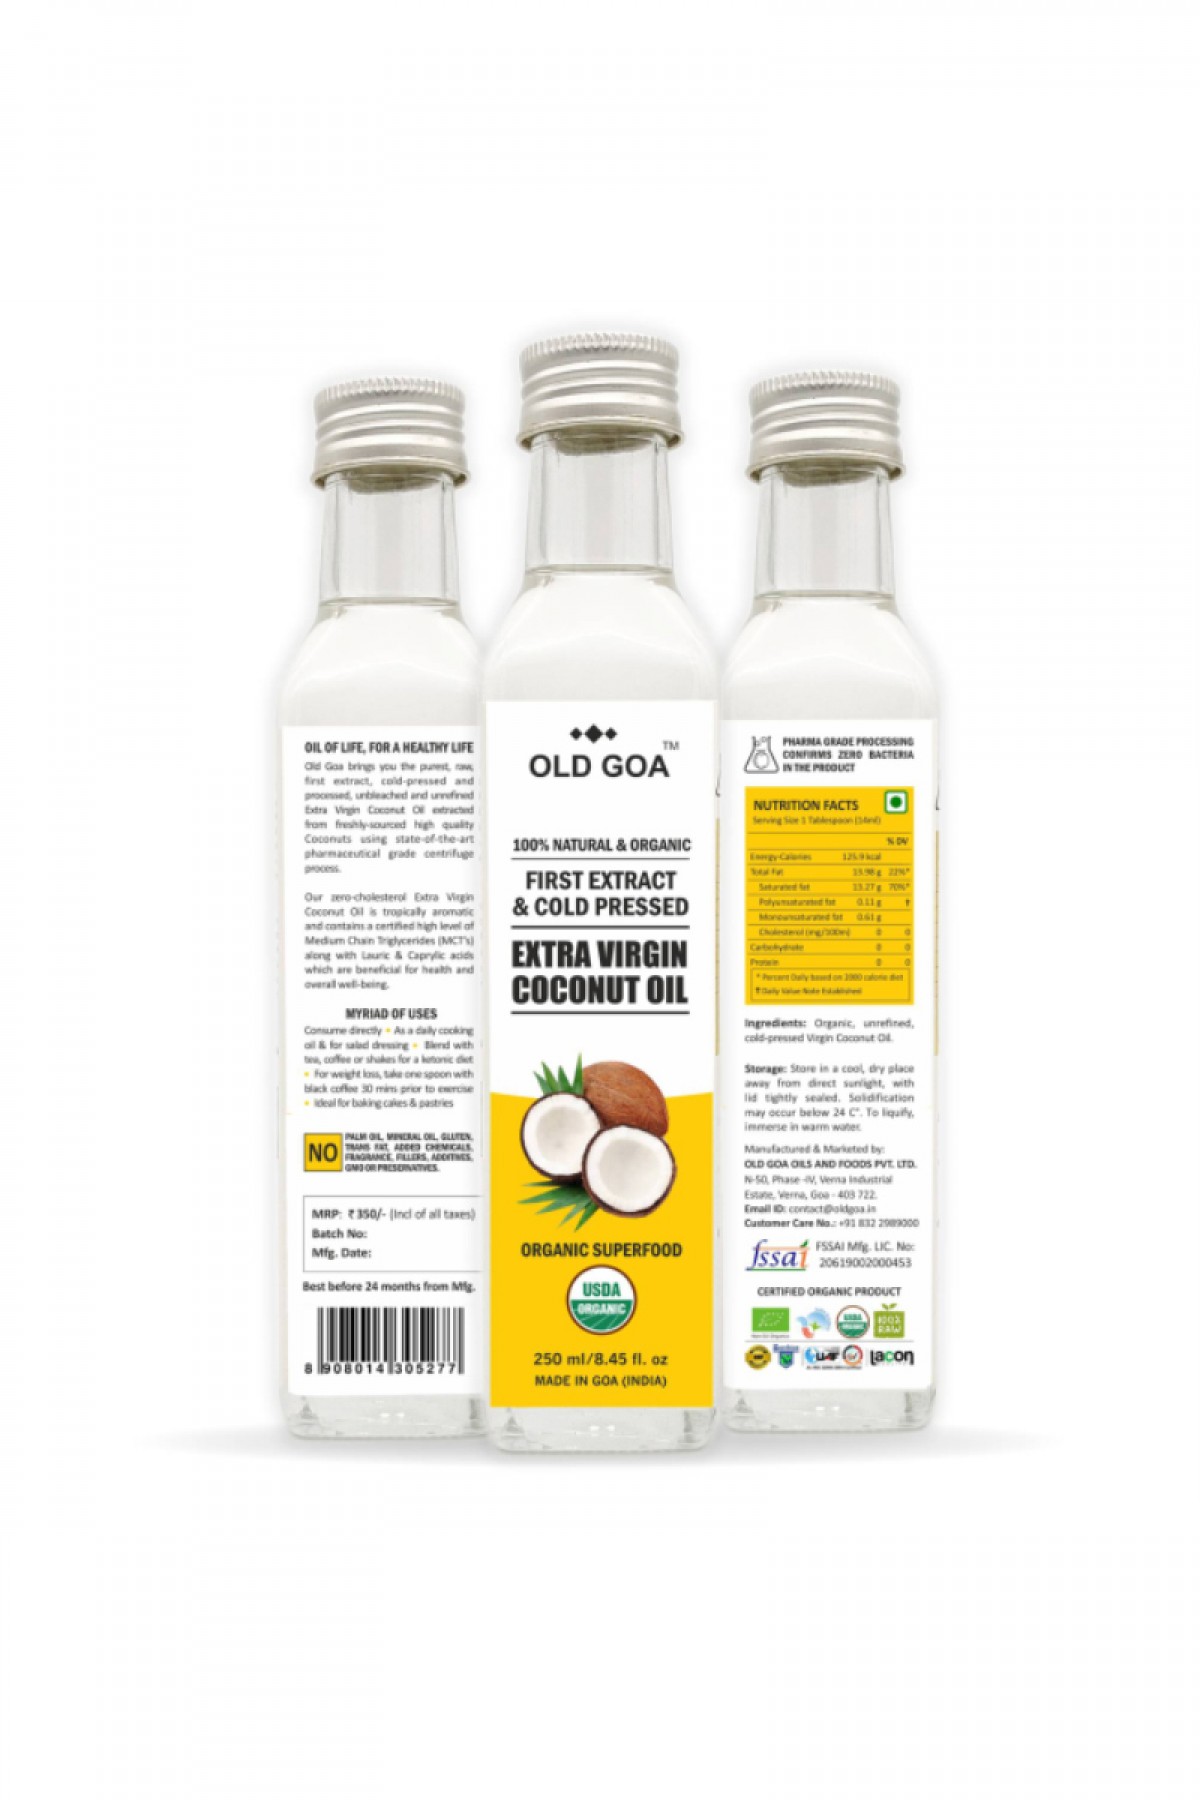 Virgin Coconut Oil | FDA Certified & USDA Organic I First Extract From Fresh Coconuts I Zero Oil Fillers I Pharma Grade I For Cooking, Baking, Frying, Hair & Skin I 100 ml